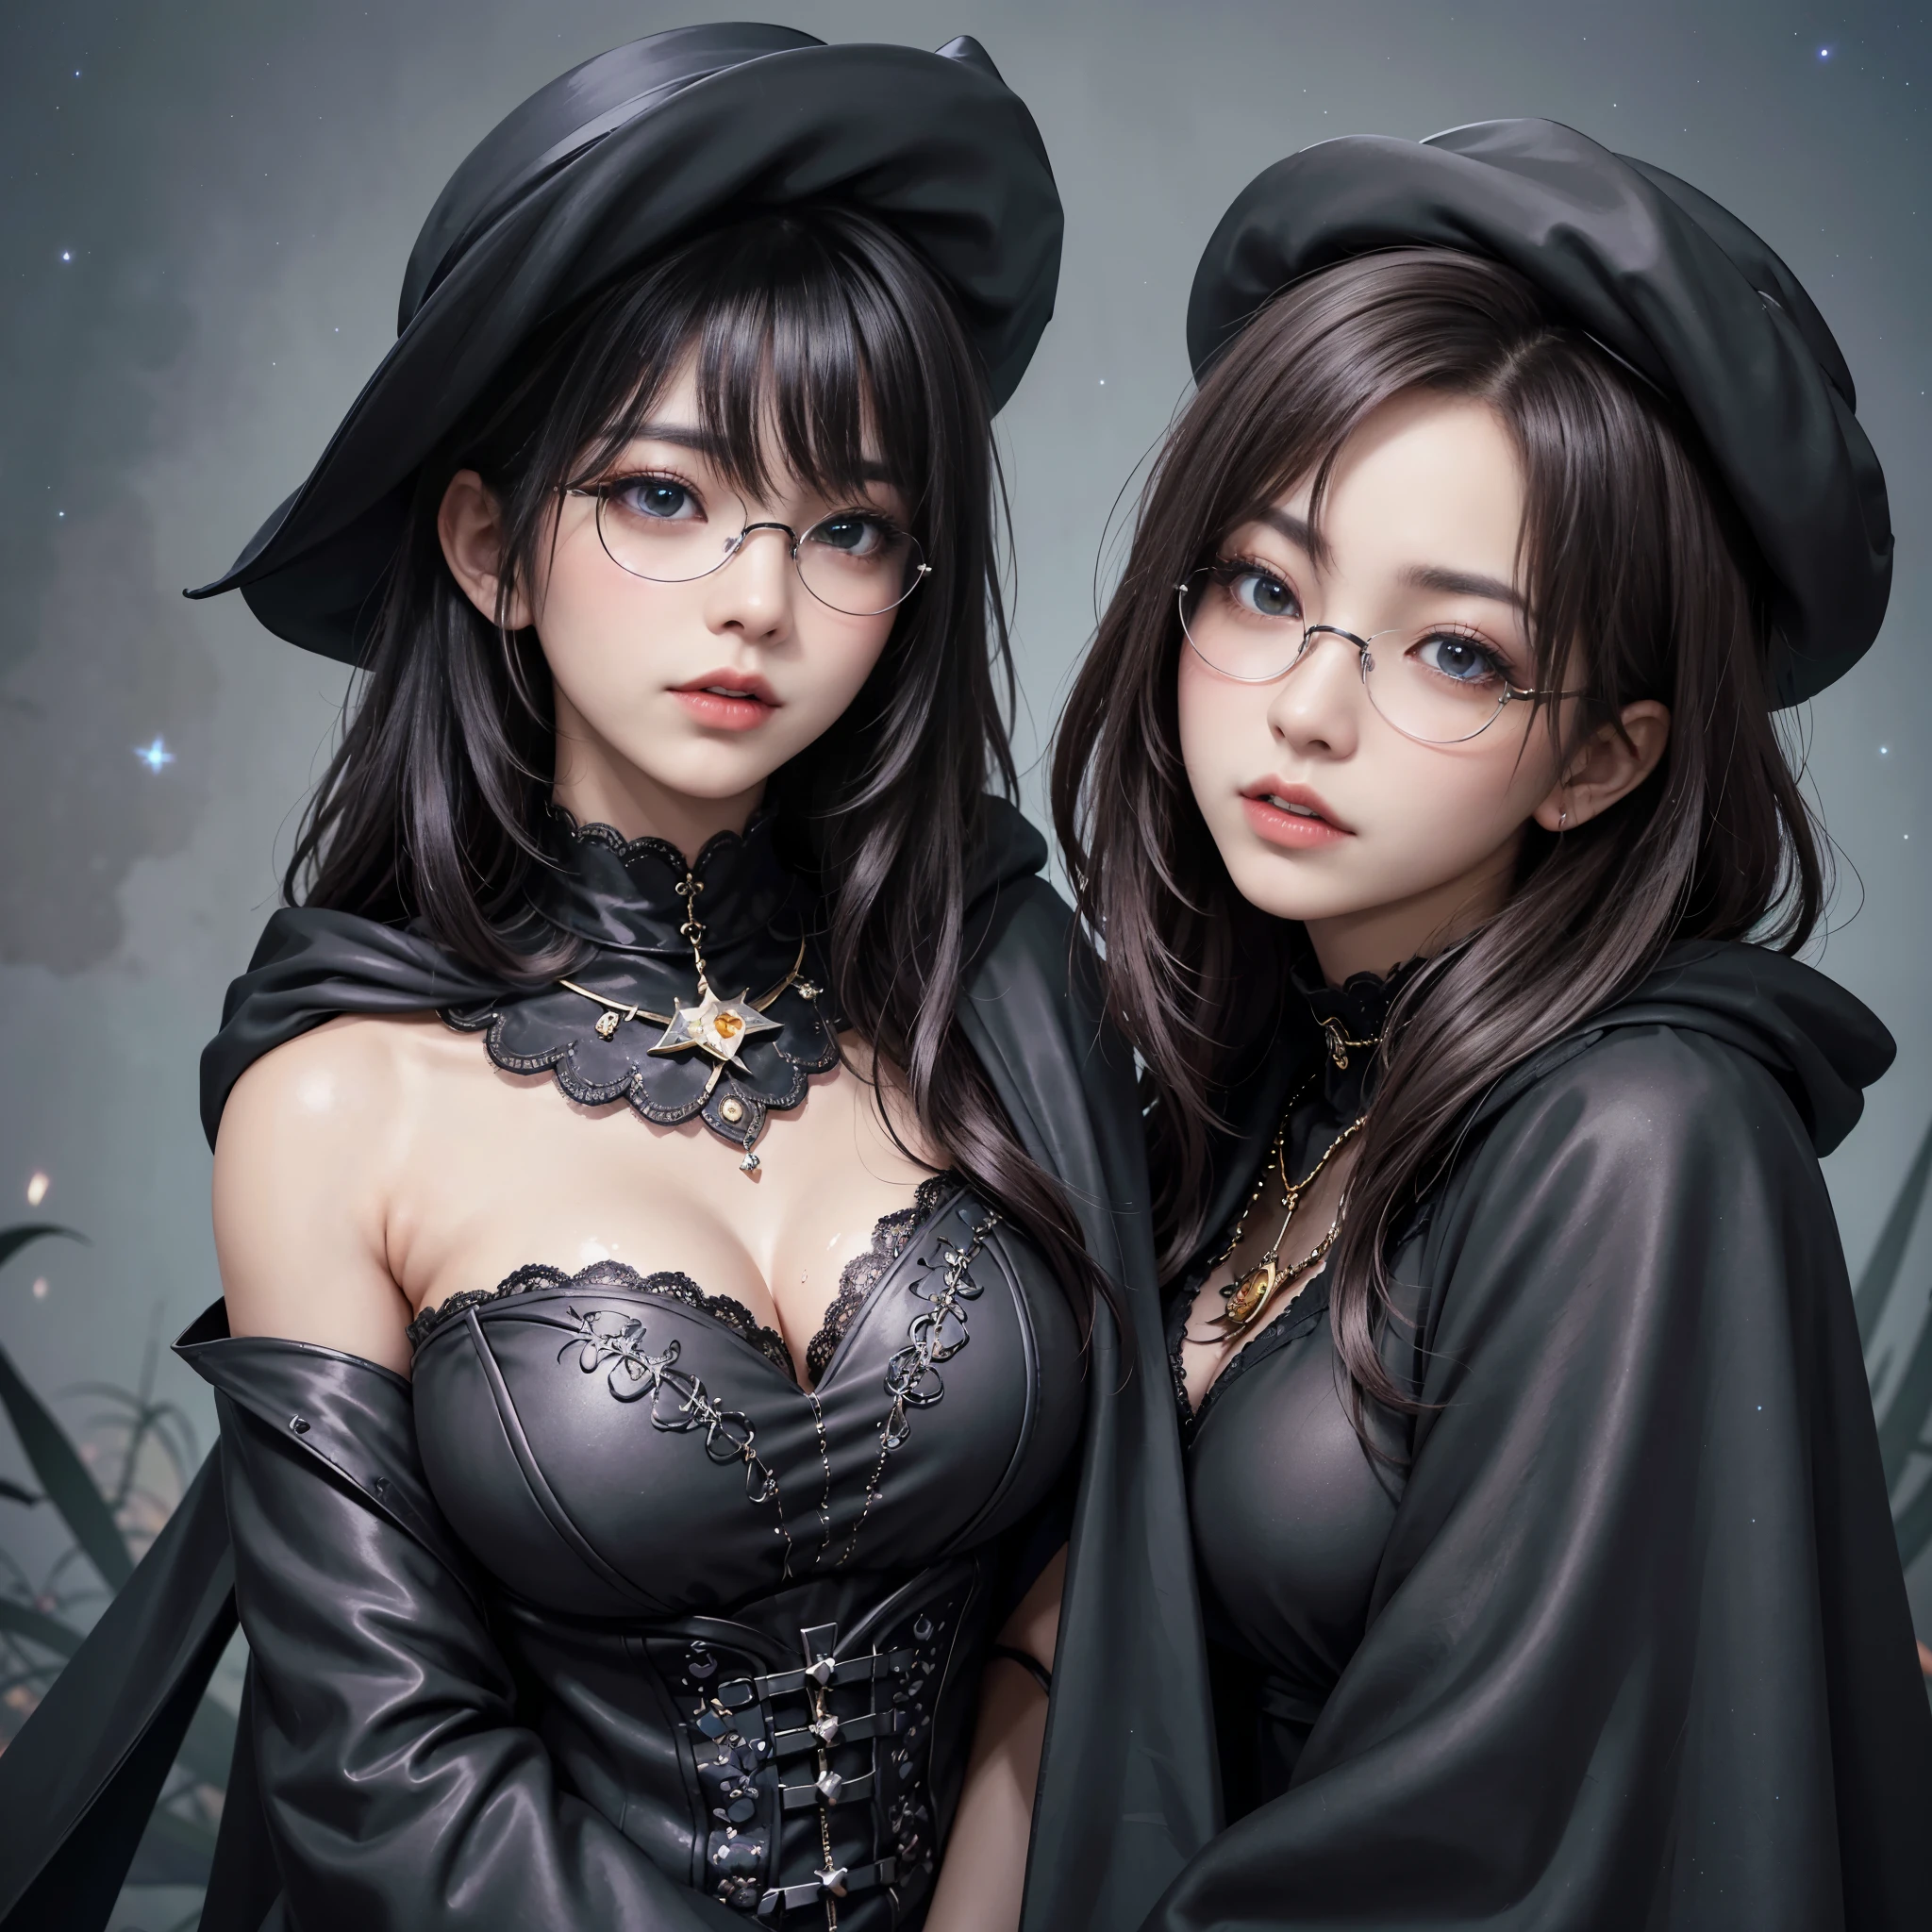 (Fatal Beauty,A charming villain,witch) ,(A supple and powerful physique),(Sensual charm),(Mysterious charm:1.1),(Captivating silhouette),((((Glasses))))、((((big sapphire necklace))))、(highest quality,High resolution:1.2),(dark,Threatening:1.1),((dark horror theme:1.5),(Thriller:1.5)),(Dark fantasy:1.5),  (((Countless stars fly away:1.5),(Absurd:1.5),(wonderful:1.5))),Woman in a dress, (Powerful numbers:1.1),(((Big Breasts))),(((Muscular:1.1))), cute face, Sexy Face, , Very detailedなbeautiful女の子, (Ideal body type:1.8), Very detailed faceexpressive lips, (Very beautiful、Crisp big eyes:1.5), Fine skin., All features are shown in detail., The outline of the fingers is beautifully drawn....., The nose is precisely shaped., expressive lips, Perfect Anatomy,cute、Realistic、(Front view:1.4),(Face Focus:1.3), realistic girl rendering, 8k artistic german bokeh, Enchanting girl, Real Girls, Gurwitz, Gurwitz-style artwork, Girl Roleplay, Realistic 3D style, cgstation Popular Topics, 8K Portrait Rendering,(truth，truth：1.4),Sexy Body,( Very lean body:1.6),Sexy pose, blush, Attractive body, Very curly hair, Purple Curly Hair, very big hair, Very curly hair, prime color,Urban,Very detailed,masterpiece,Intricate details,Faded,Very detailed, Eye for details,Intricate details,Dark and spooky atmosphere,  Spiritual Beings, Unforgettably beautiful, Ghostly figures, Shadow-like shape, Spooky whispers, Ominous Aura, Goth Maiden,  Like dazzling fur in a starless haze,Her Mogul Snaps, Mysterious Cemetery,Black hair swaying in the moonlight, She summons darkness, (beautiful: 1.7), (Black Hat: 1.6), (An intricately decorated jet-black cloak: 1.6), (Delicately decorated cloak, Despite the damage: 1.5), Hypermaximalist,  Breathtaking oil paintings, Surreal, Ultra-realistic digital illustrations that mimic the style of oil paintings, Wonderful configuration,  (Shining Eyes:1.6)、(Glowing Eyes:1.1),(hellish landscape:1.1),(fire,sulfur:1.1),(Threatening atmosphere:1.1),(dark shadows,Threatening pre